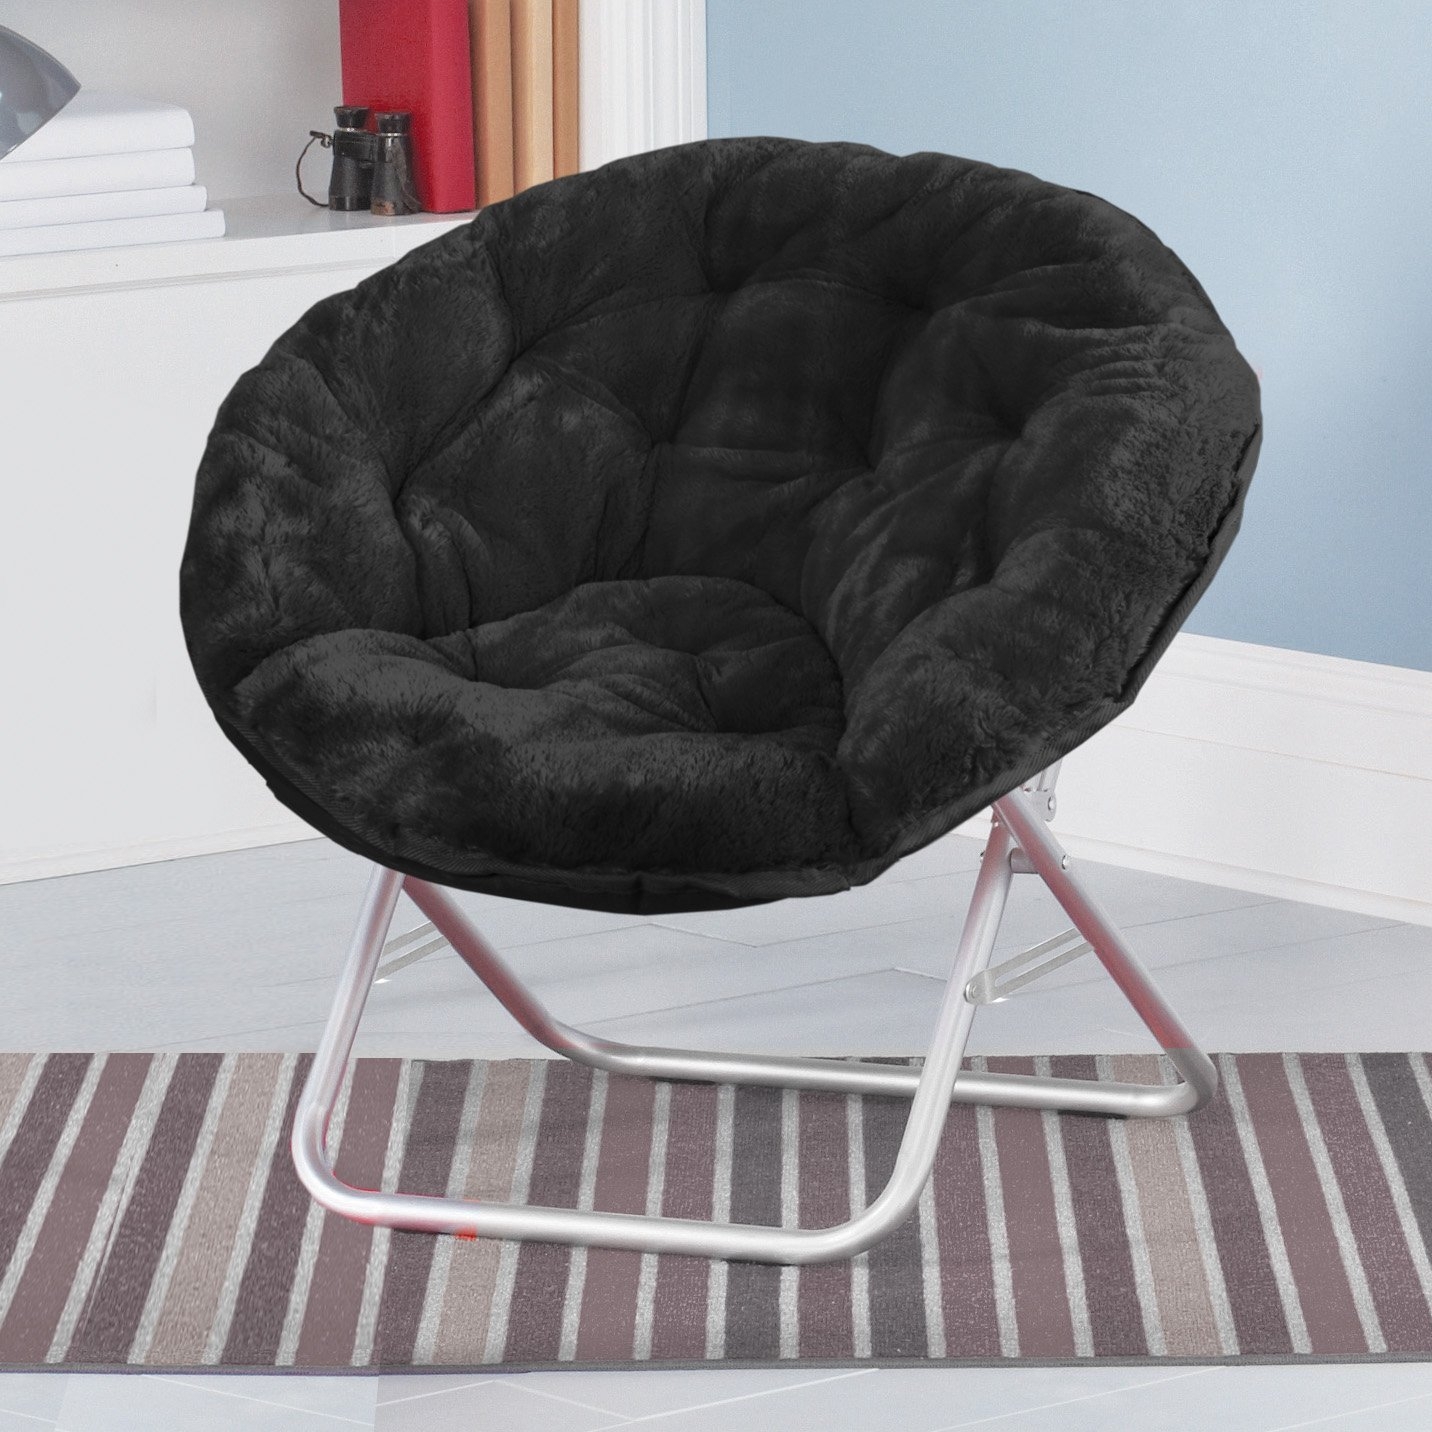 Black Faux Fur Saucer Chair Features Sturdy, Aluminum Construction & Soft Faux Fur Upholstery. Folds Up Easily To Store. Lounge, Study, Read, Watch TV On This Convenient, Space-Saving, Folding Chair - The Perfect, Stylish, Convenient Addition To Your Home